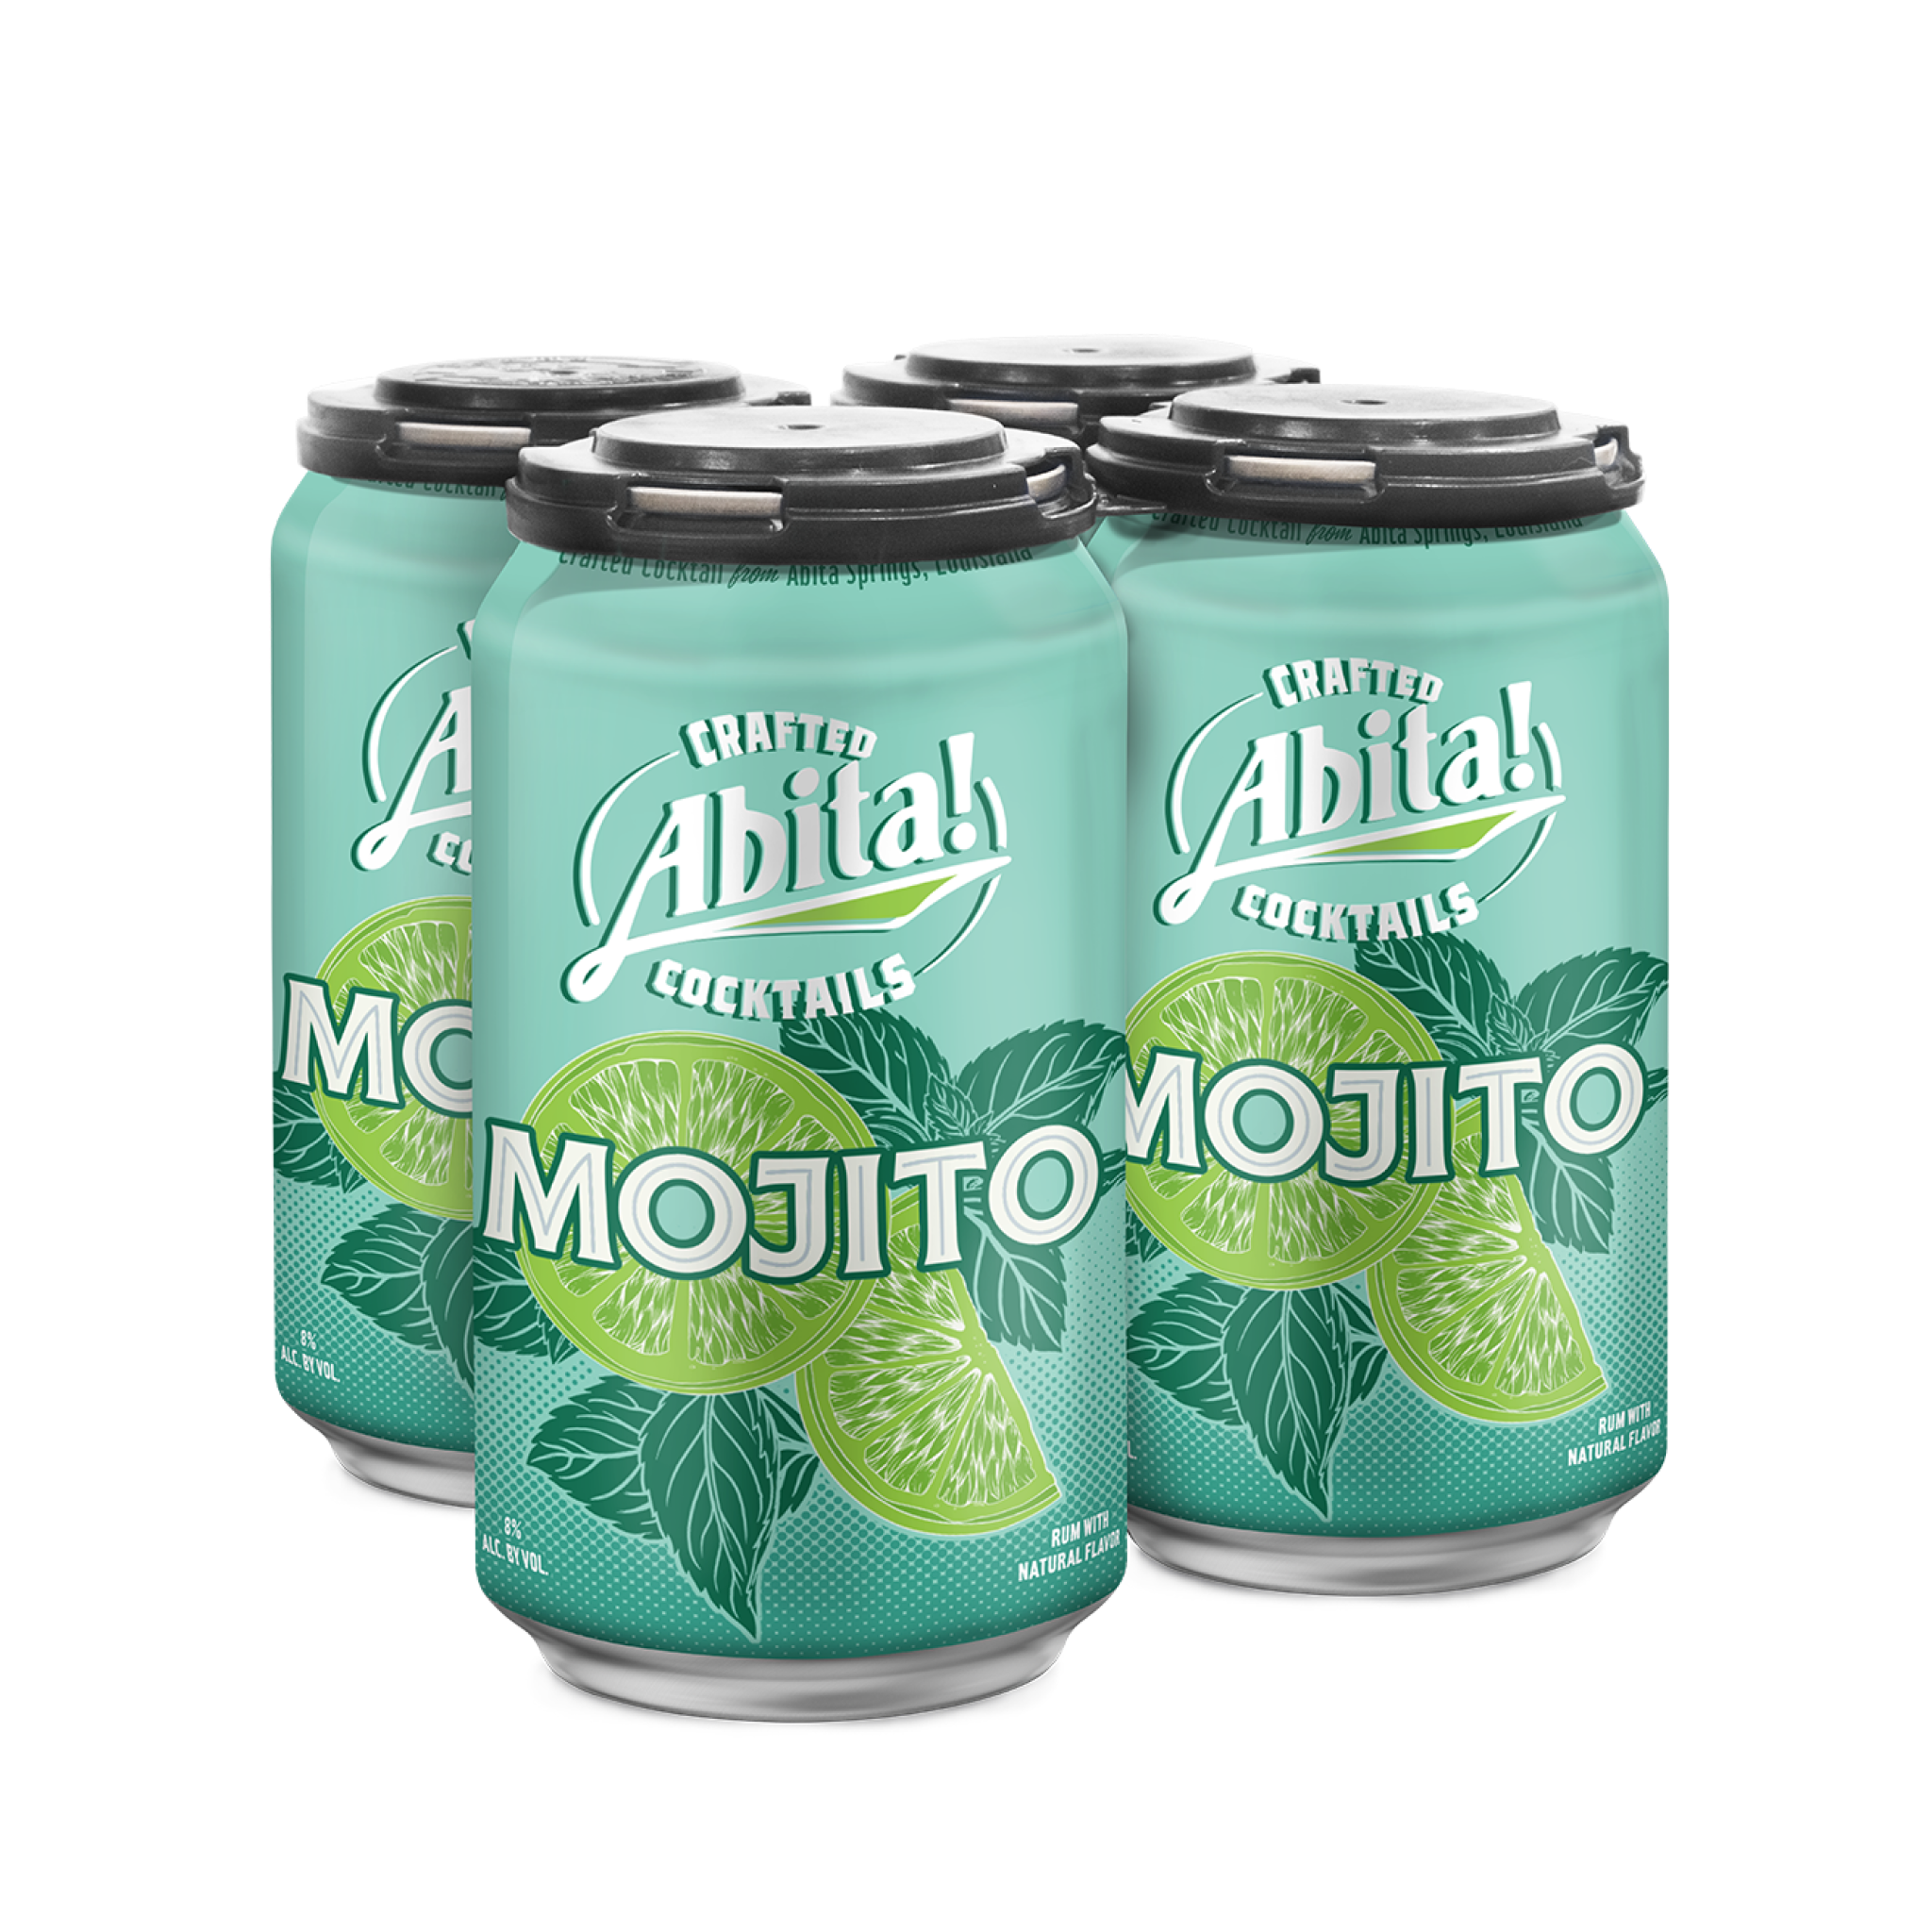 4 pack of Abita Crafted Cocktails, Mojito